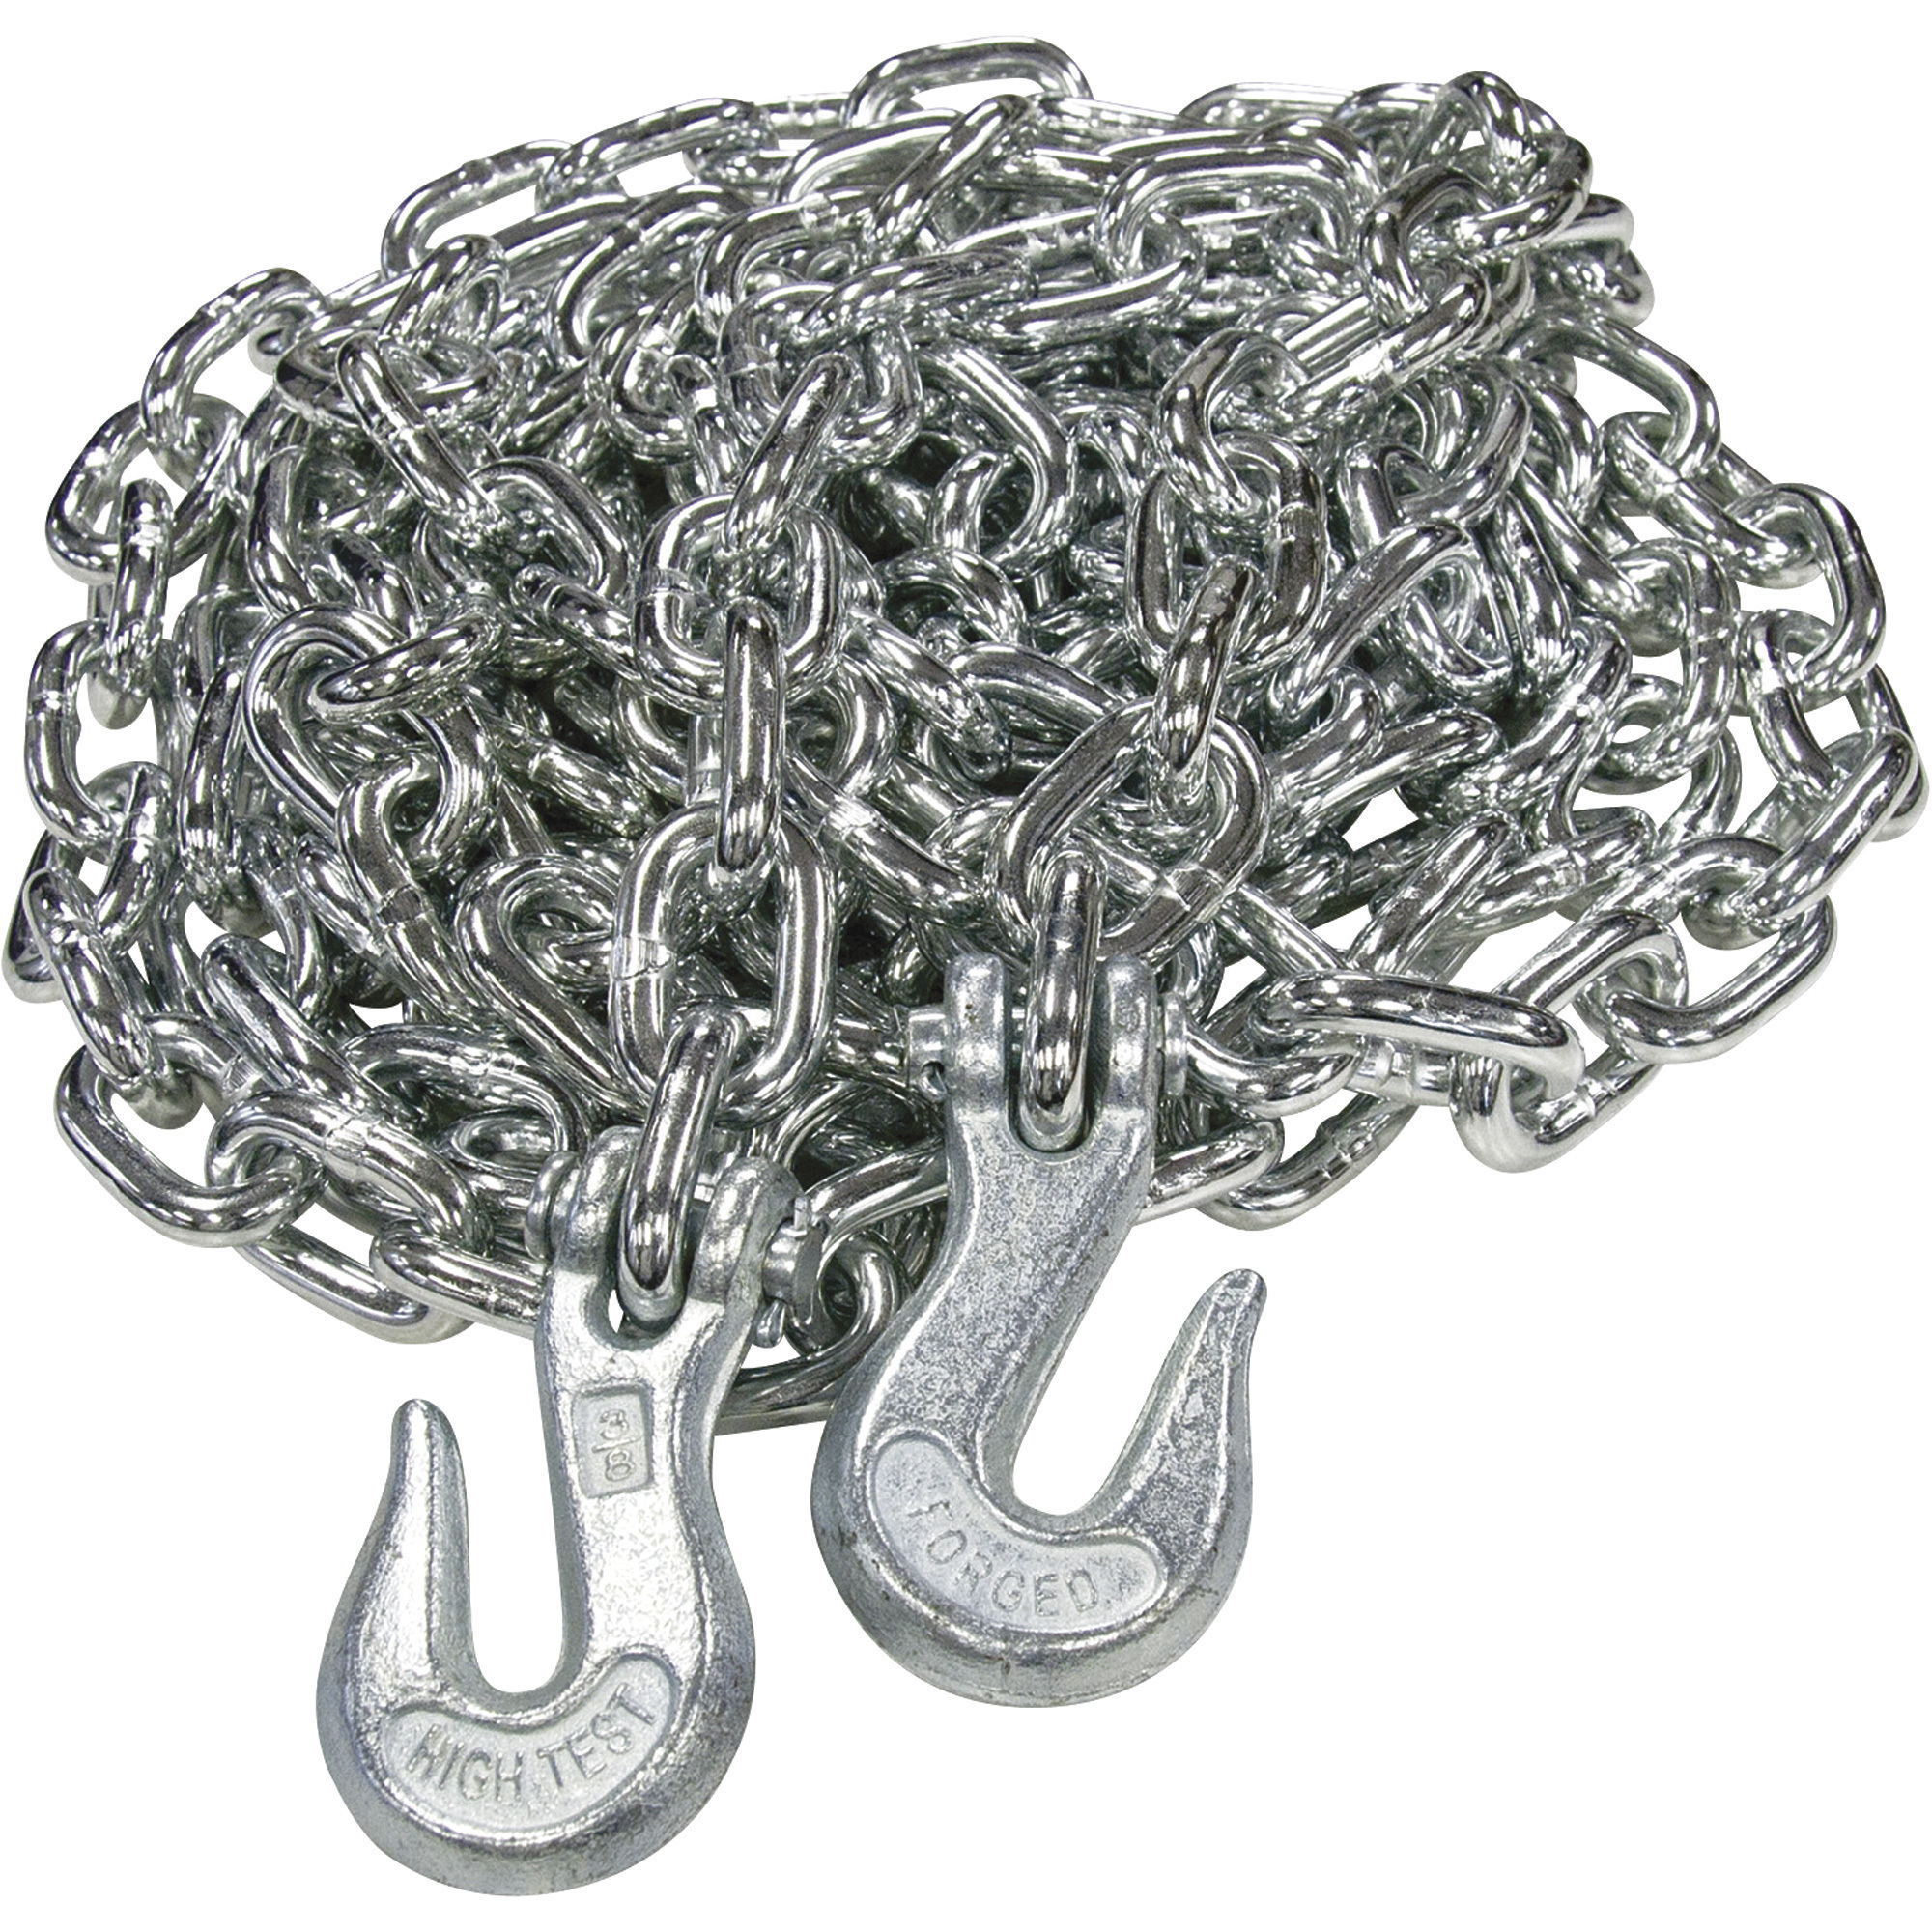 MIBRO High-Strength Tow Chain, 3/8Inch x 20ft., Model 427490